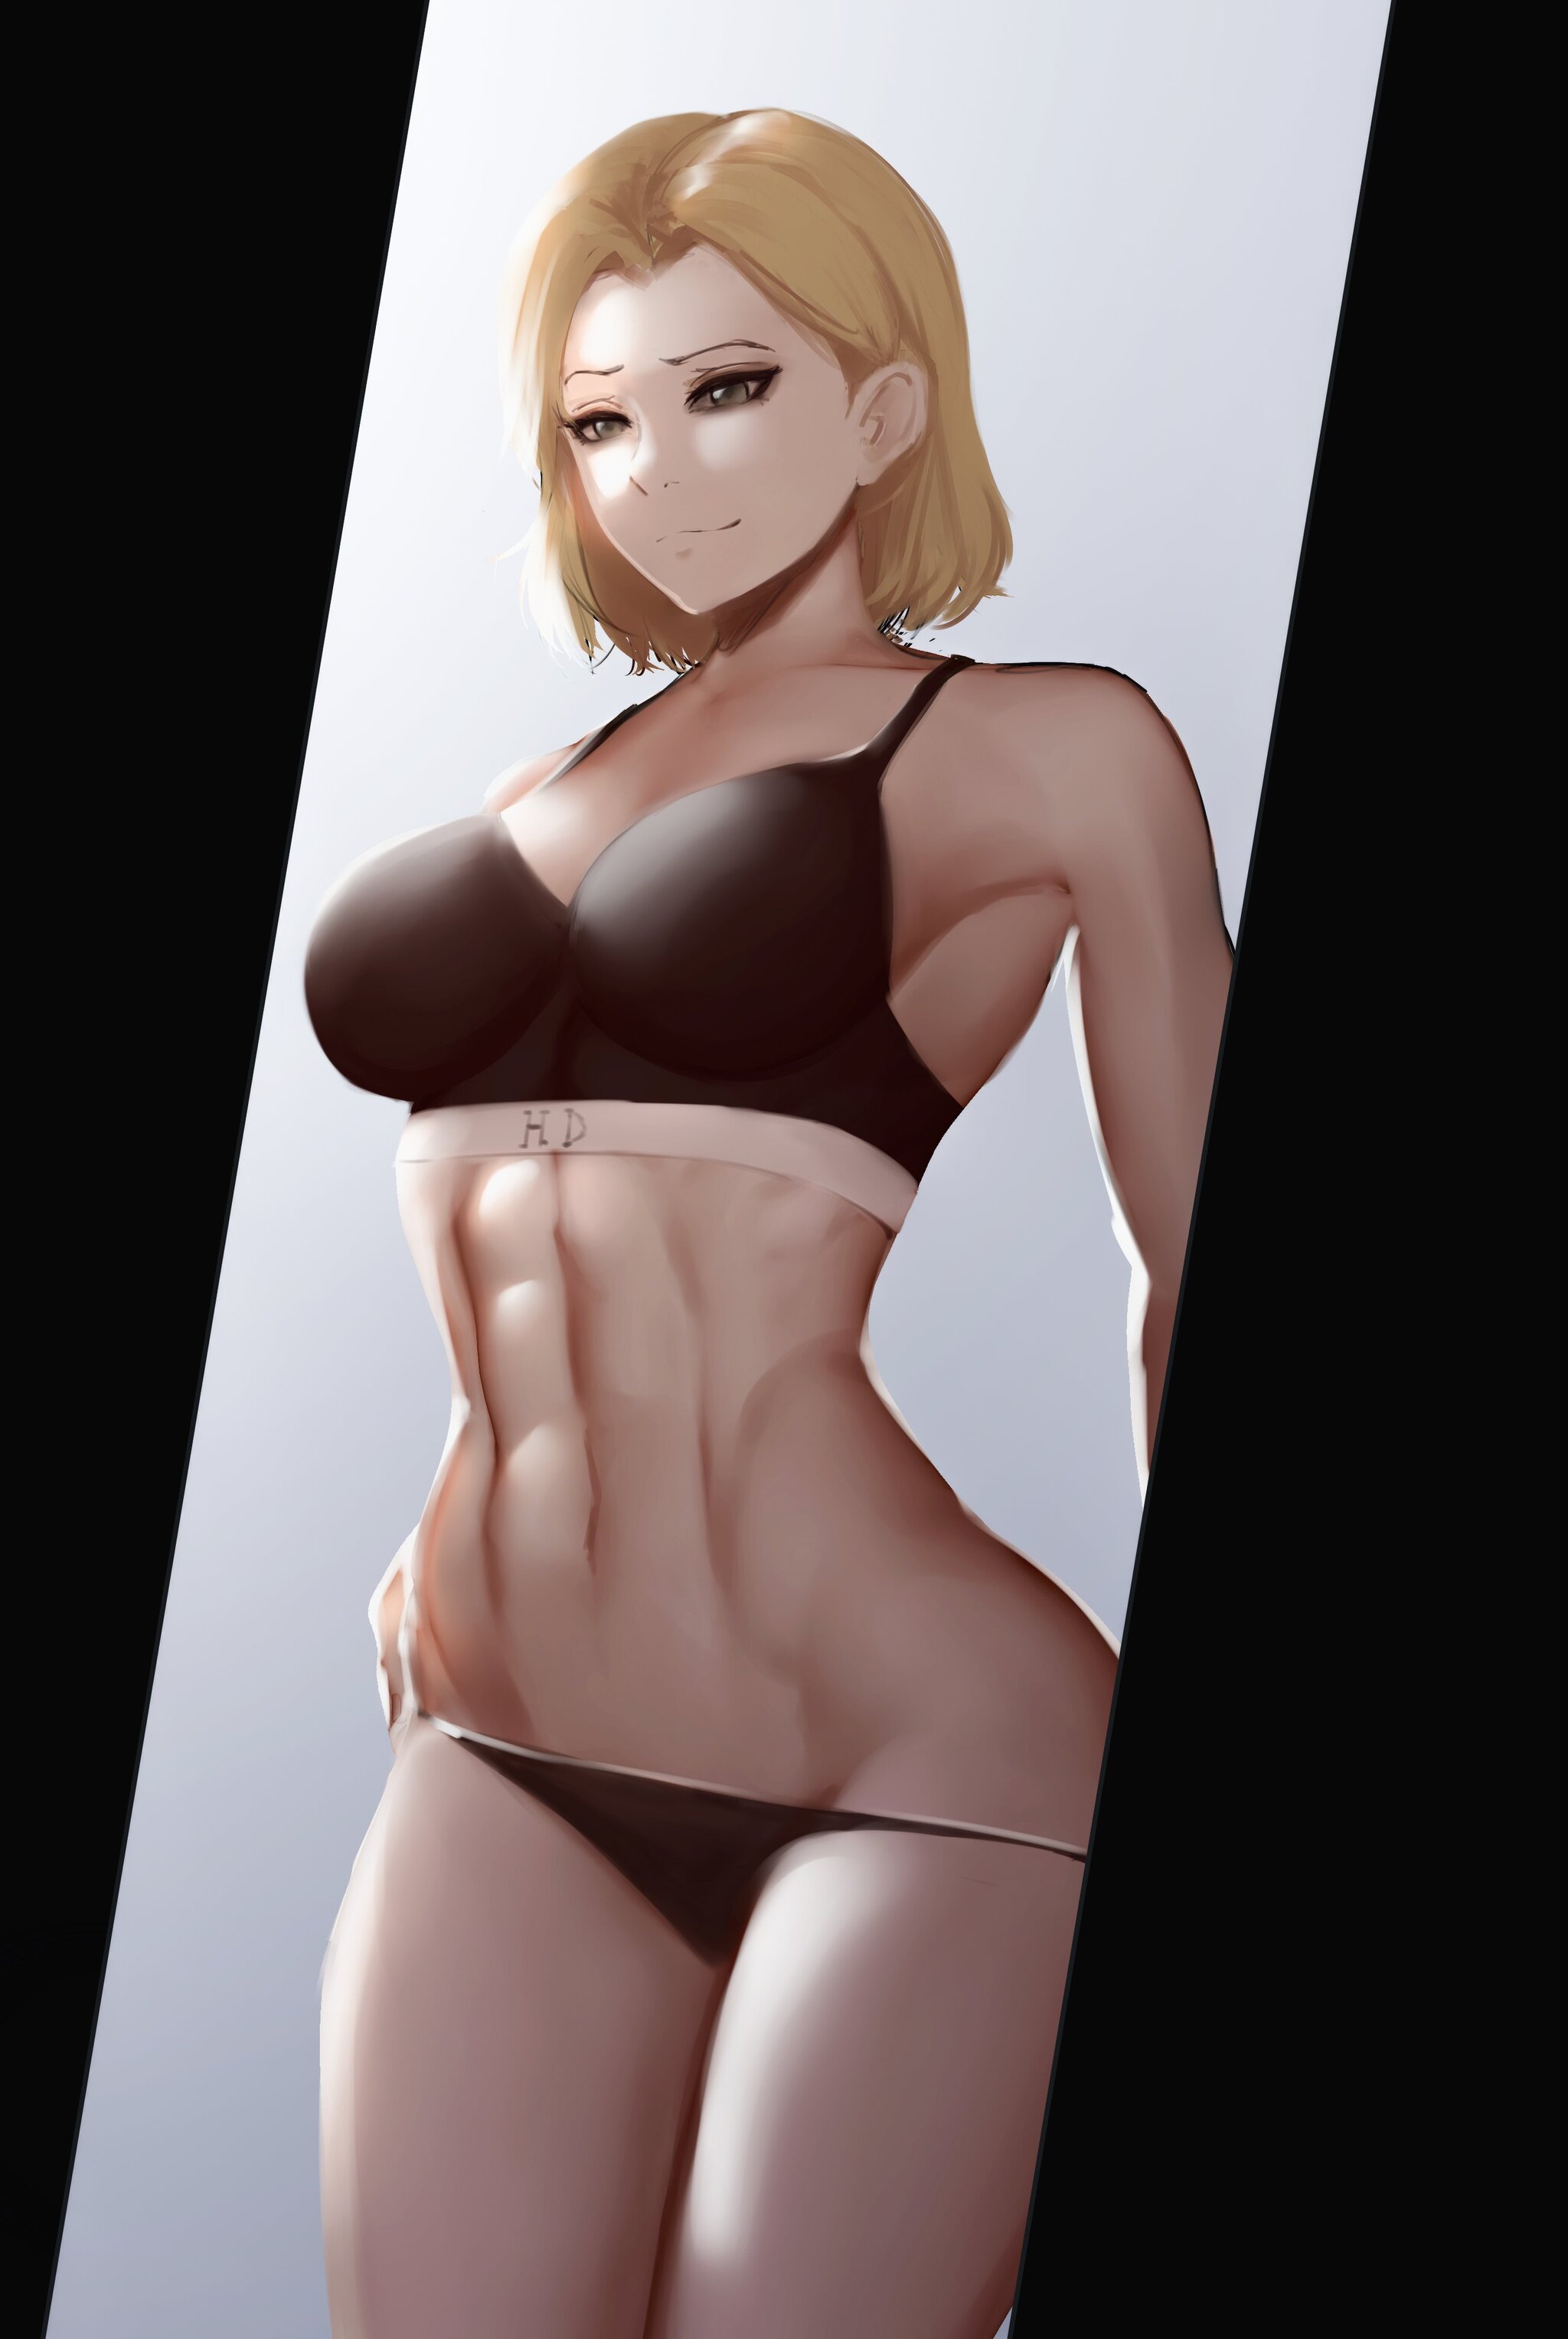 Hitch Dreyse - NSFW, Anime art, Anime, Attack of the Titans